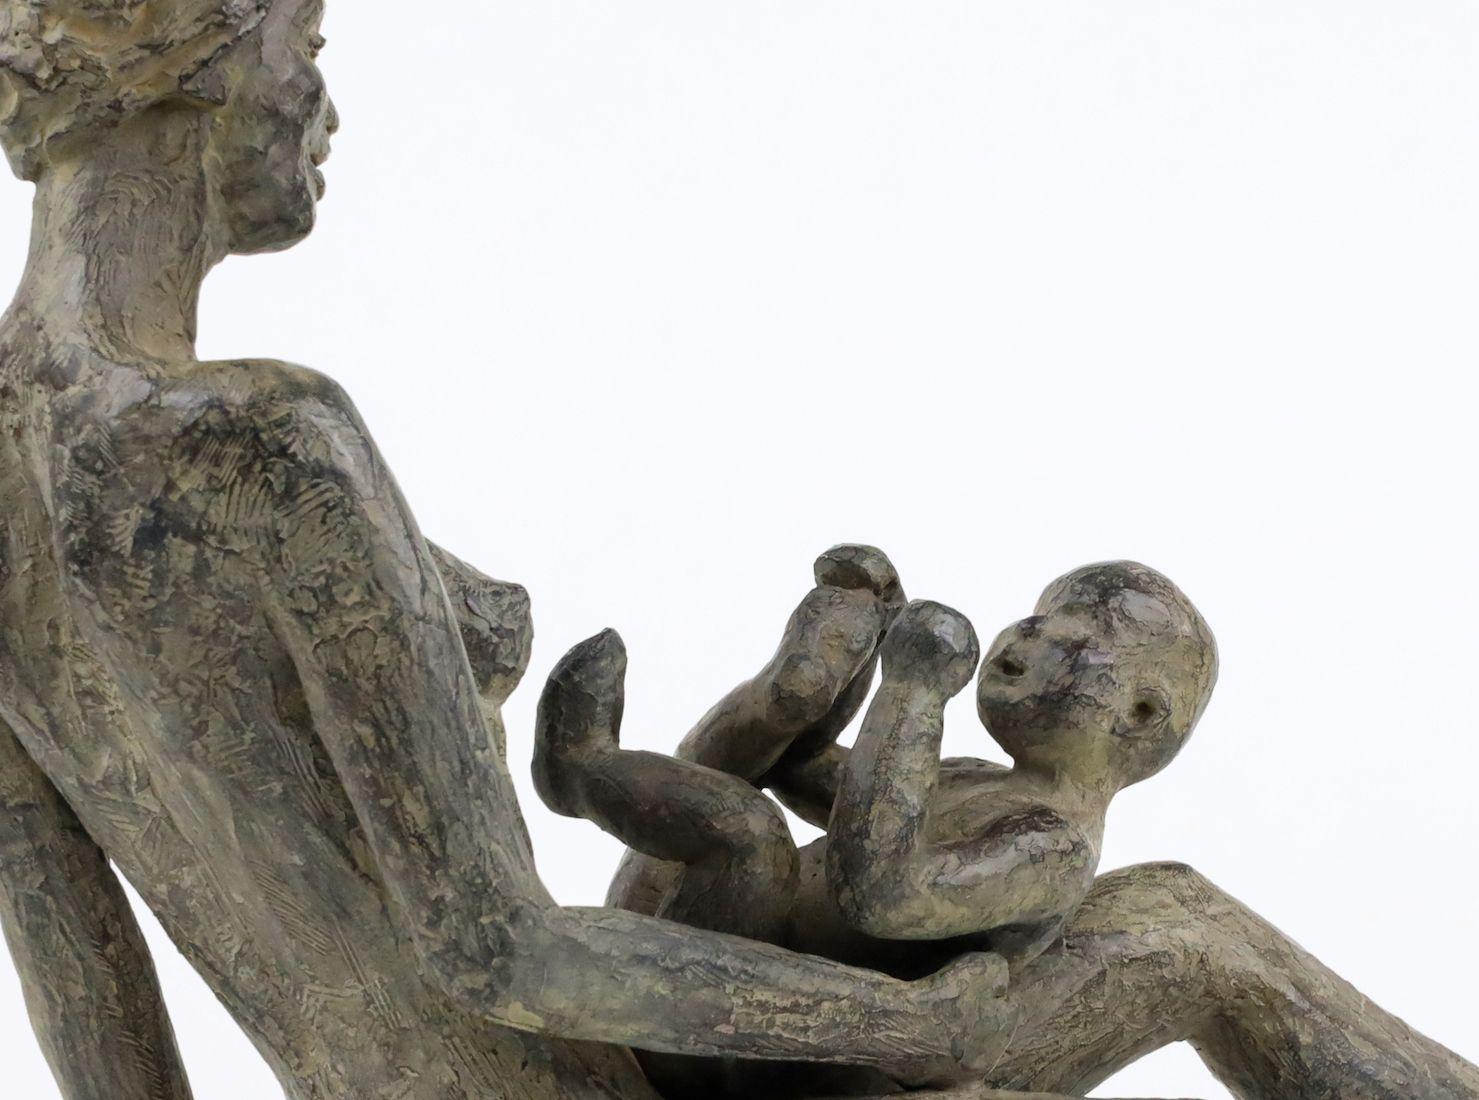 Babbling (Babillages), by French contemporary artist Marine de Soos.  
Bronze, 25.5 cm × 40 cm × 13 cm. Limited edition of 8 copies and IV artist’s proofs.
Each of Marine de Soos' sculptures has its story, being a memory of a real moment or an